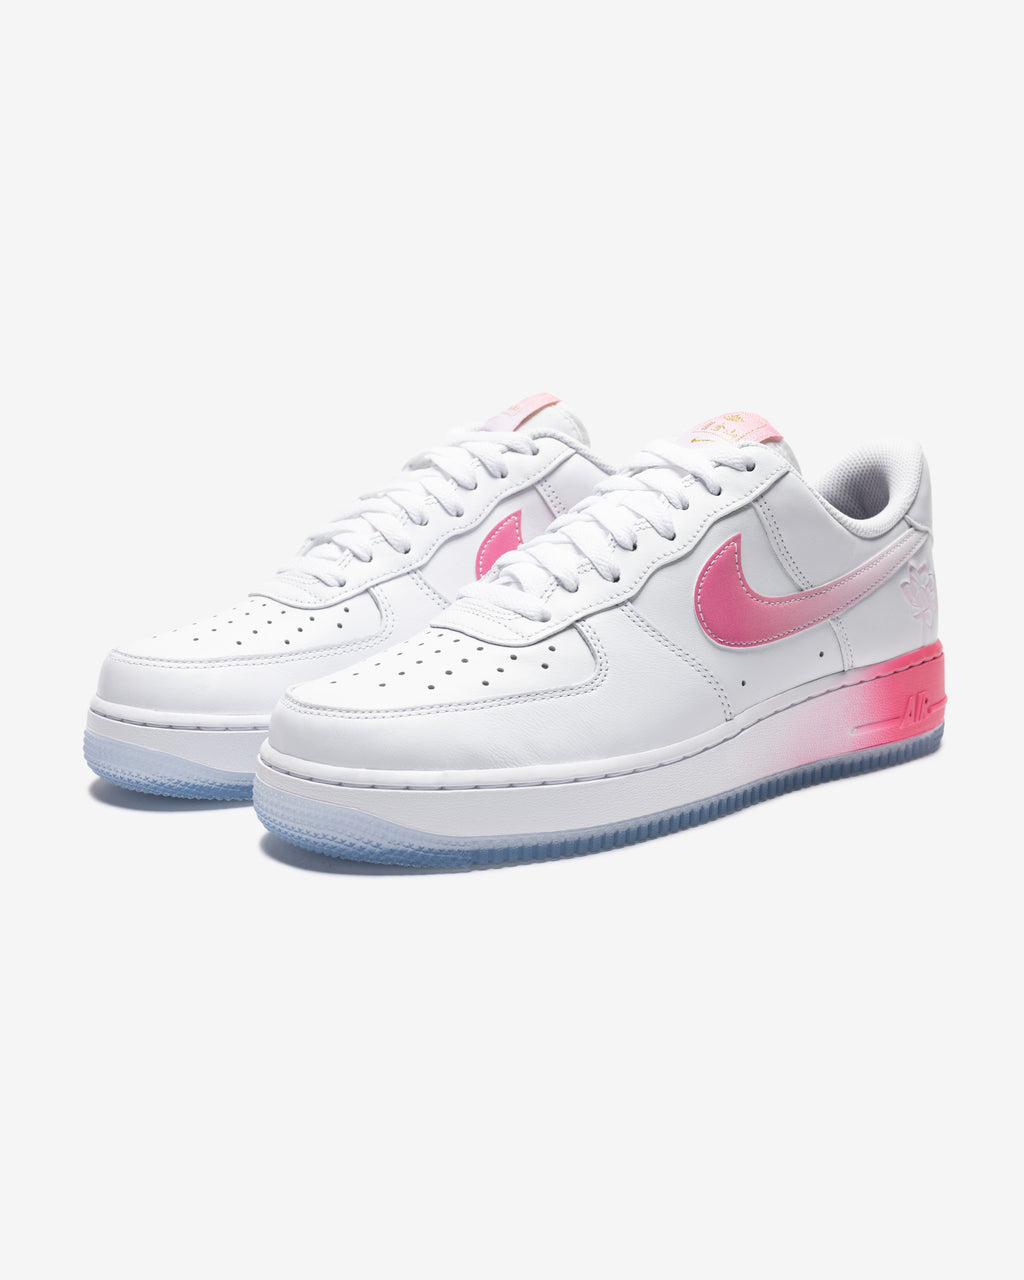 NIKE AIR FORCE 1 '07 PRM - WHITE/ LOTUSPINK/ YELLOWGOLD/ BLUEJAY